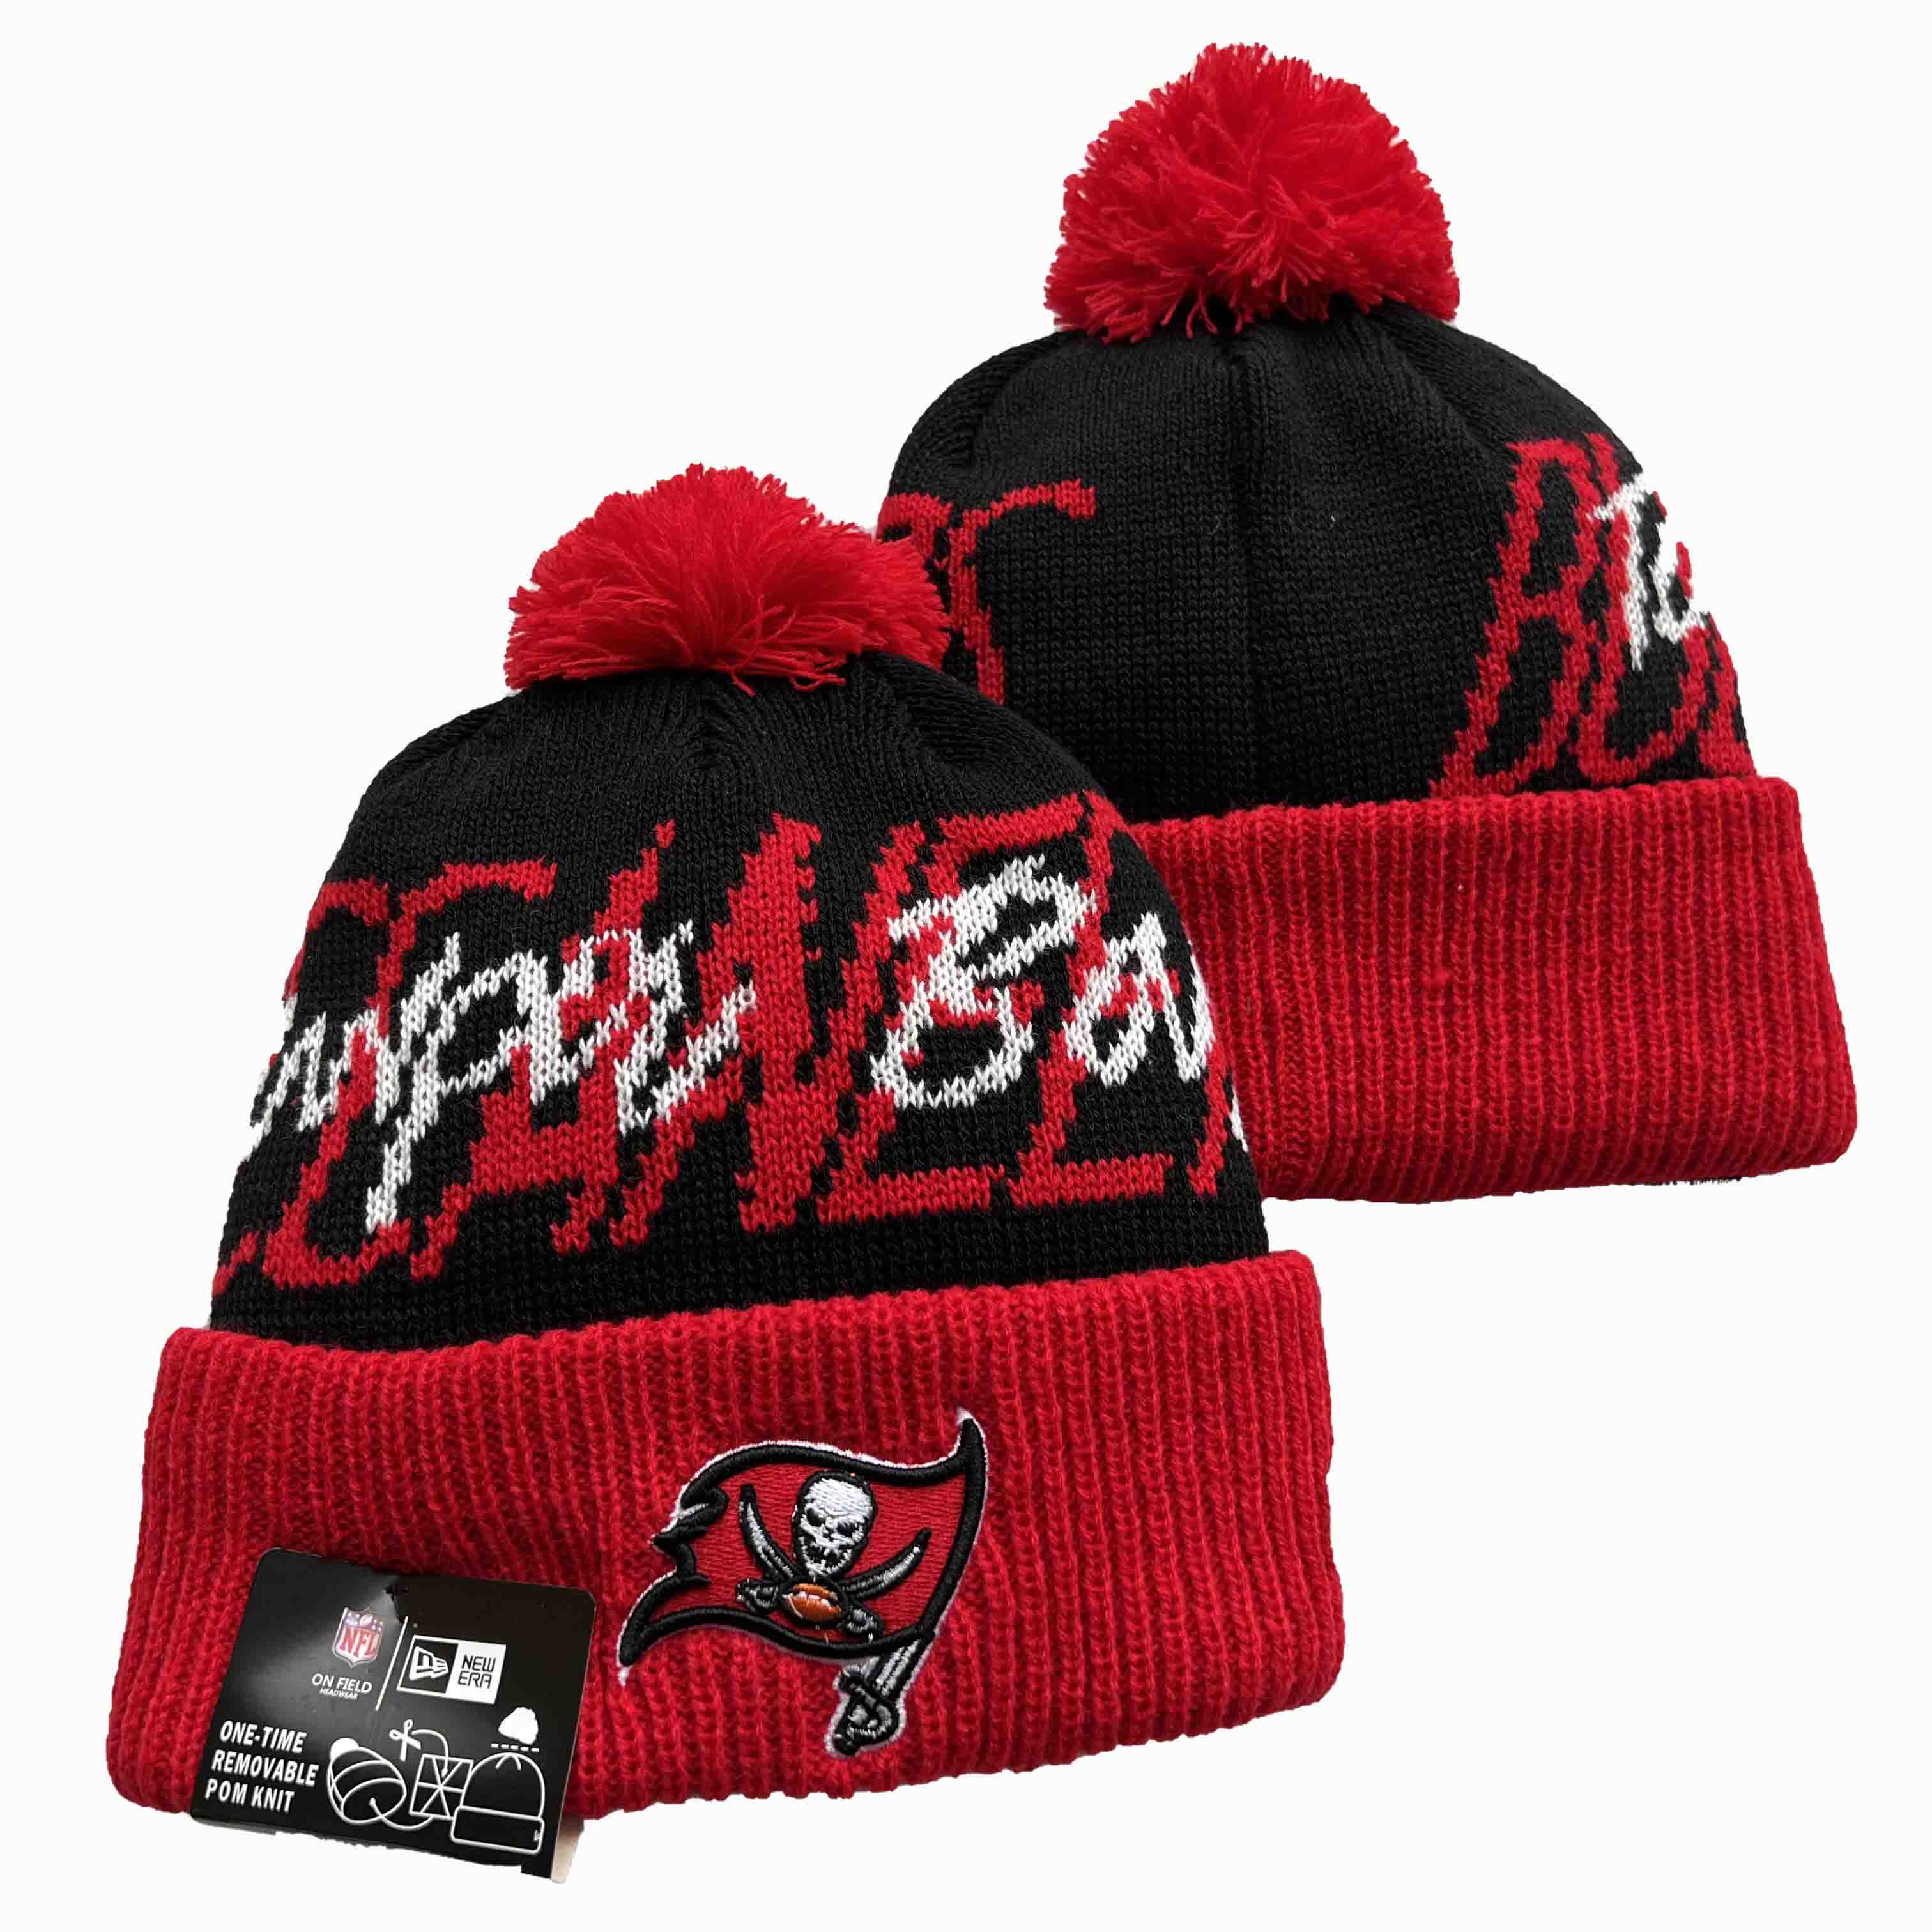 Tampa Bay Buccaneers Knit Hats -2